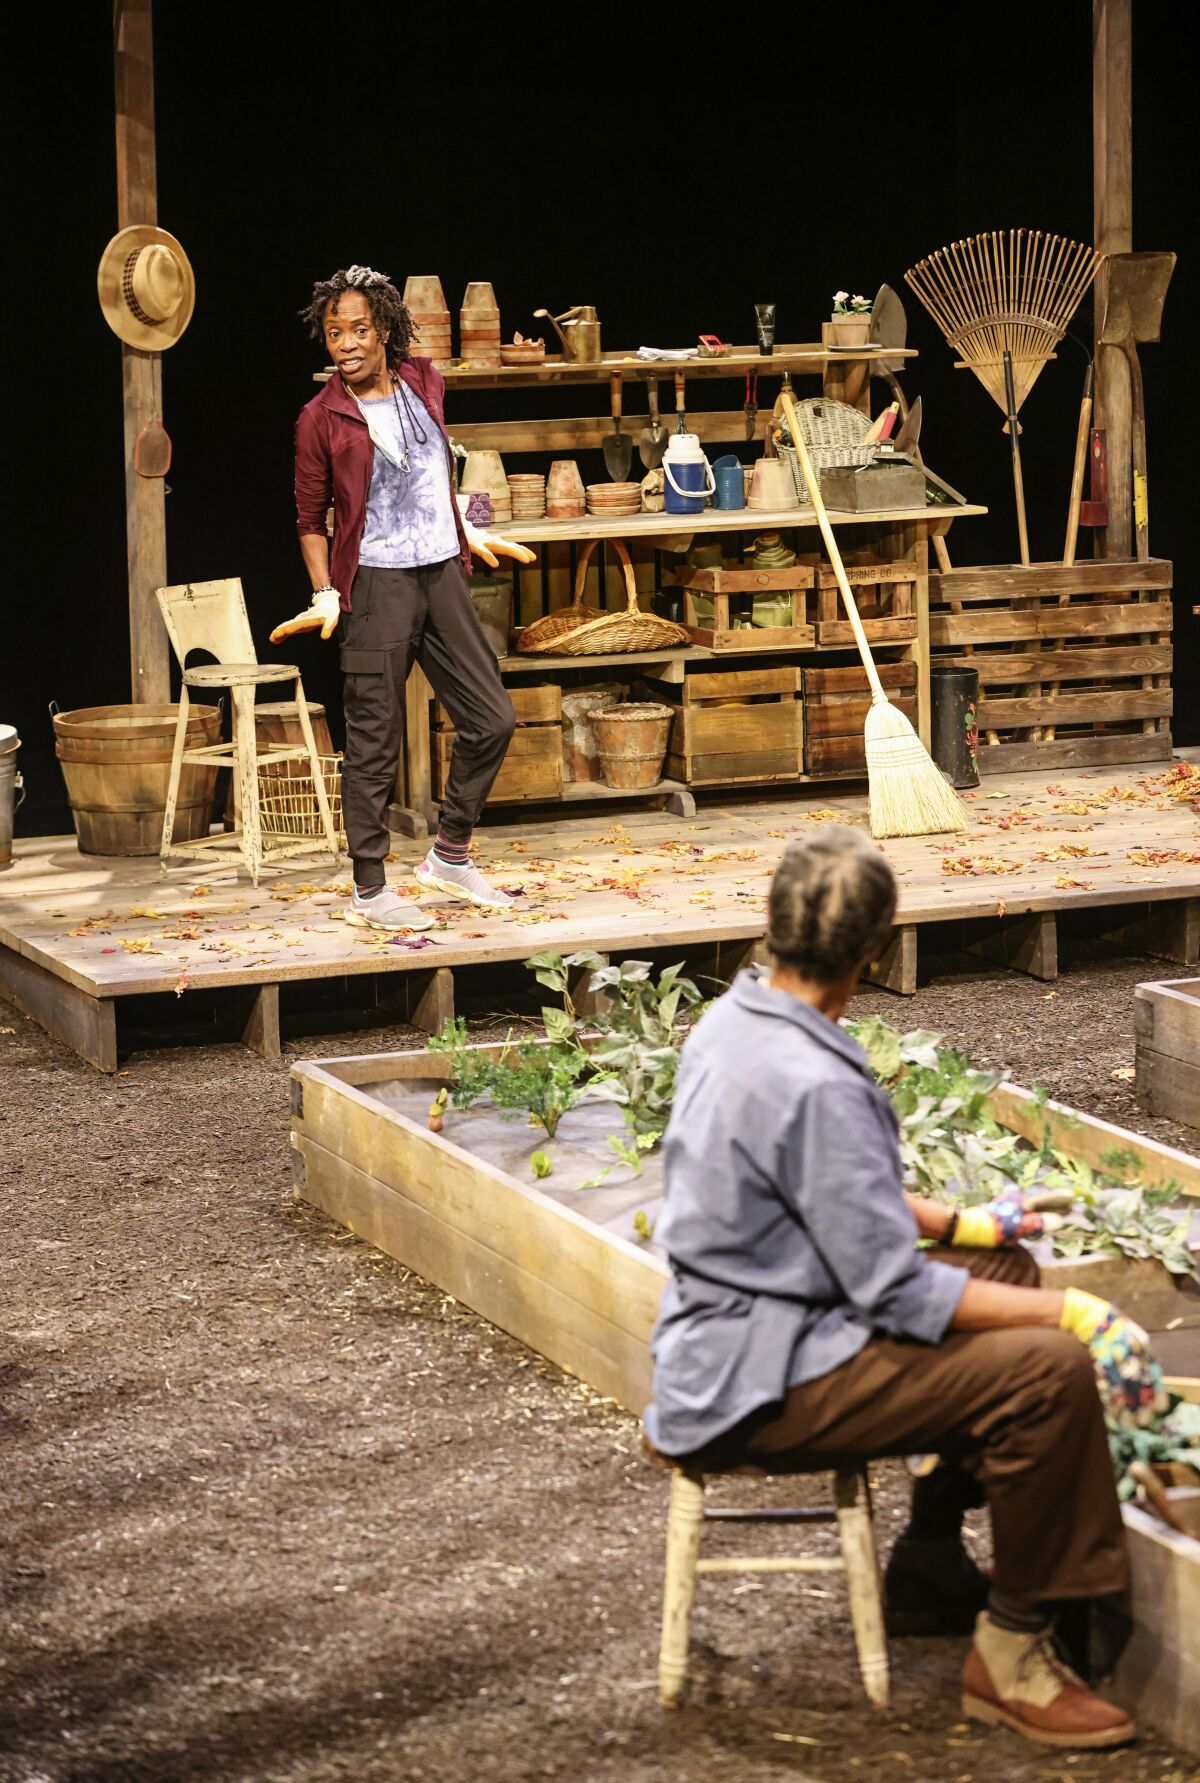 Actresses Charlayne Woodard, left, and Stephanie Berry rehearse a scene for "The Garden" at La Jolla Playhouse.